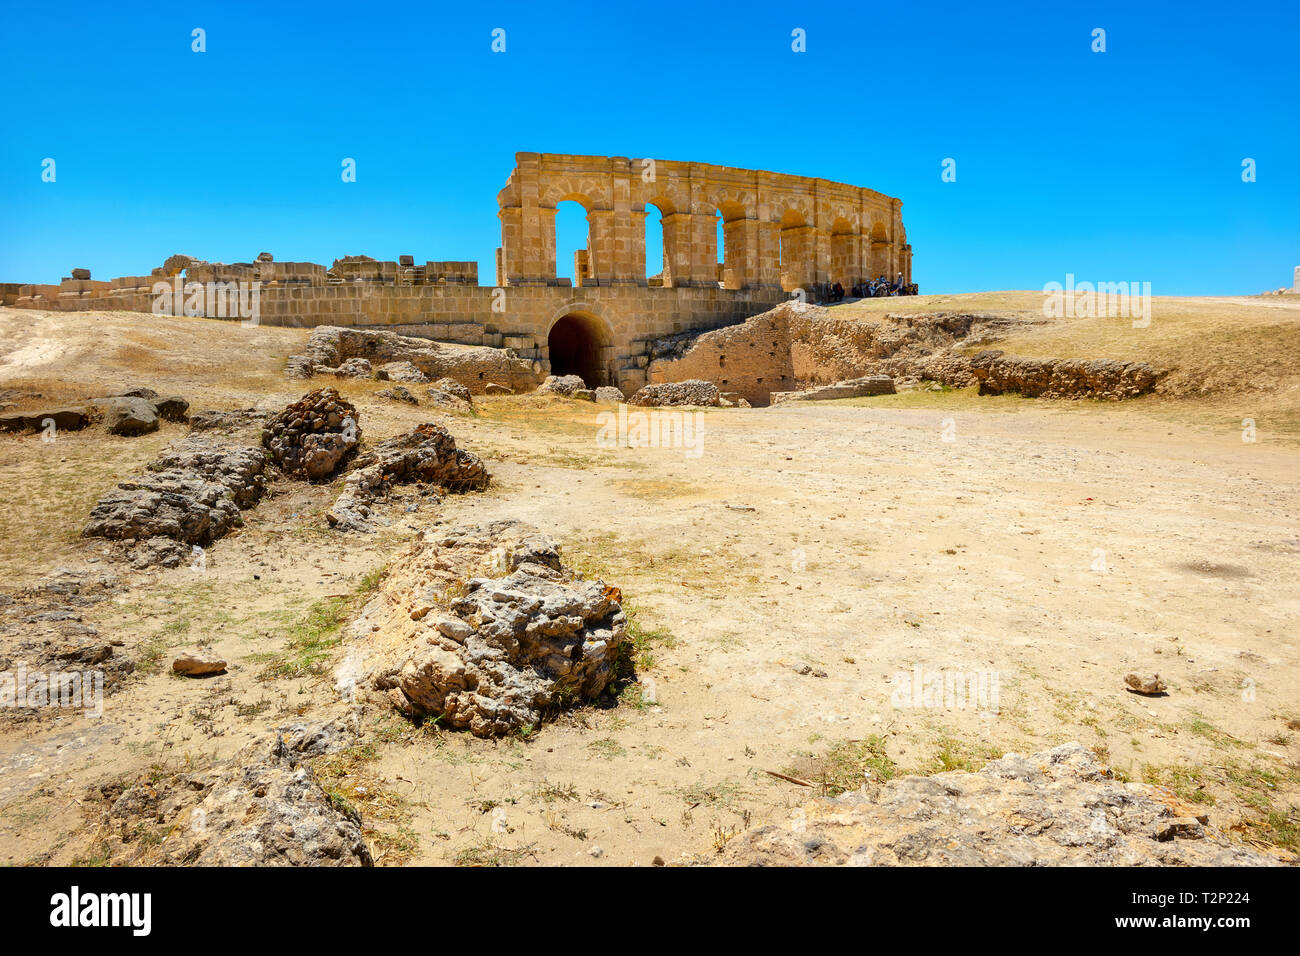 Archaeological site of ancient ruins in roman town Uthina (Oudhna). Tunisia, North Africa Stock Photo